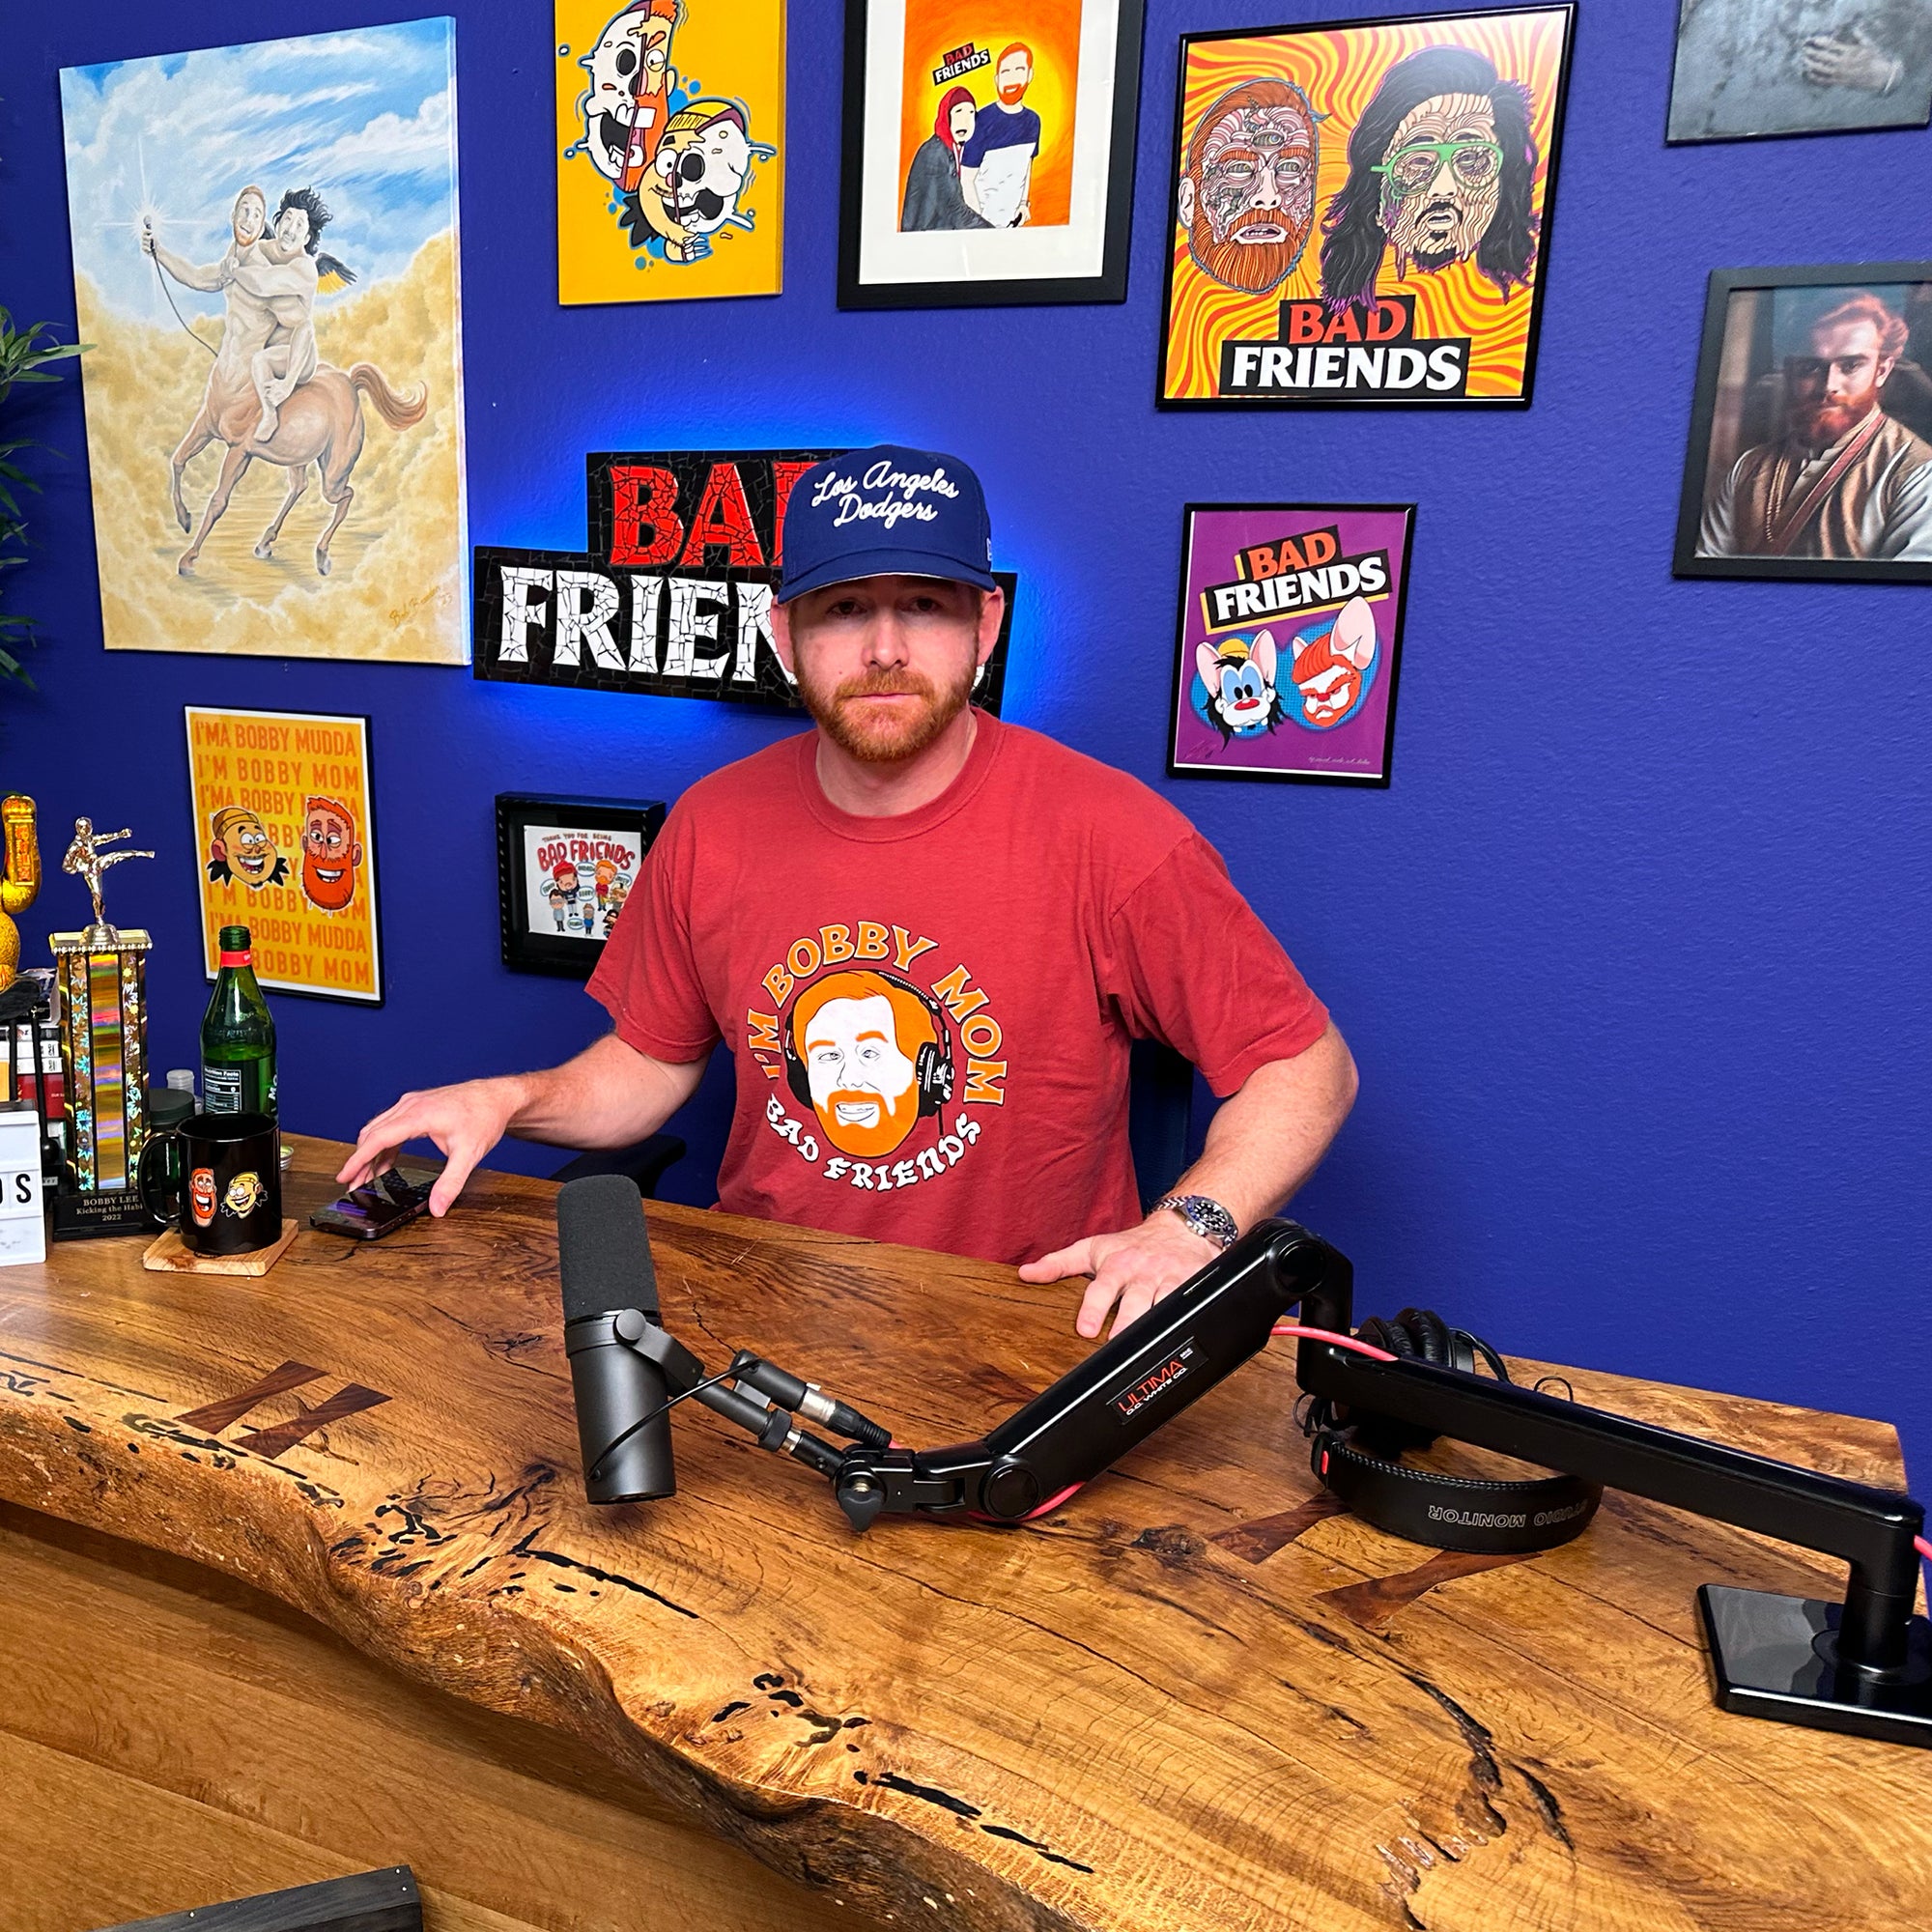 Andrew with his "I'm Bobby Mom" t-shirt sitting at his podcast chair